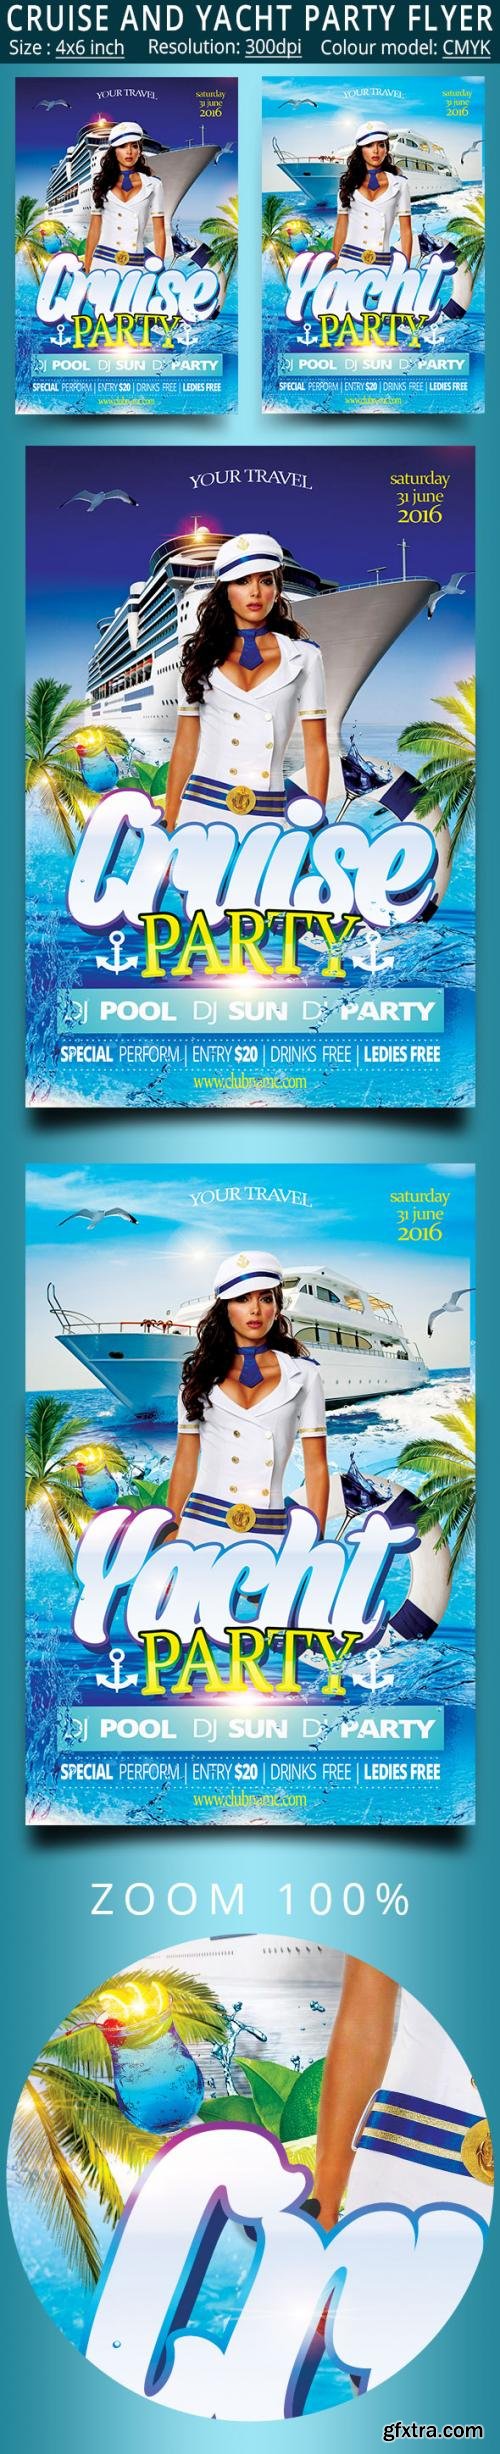 CreativeMarket Cruise And Yacht Party Flyer 577920